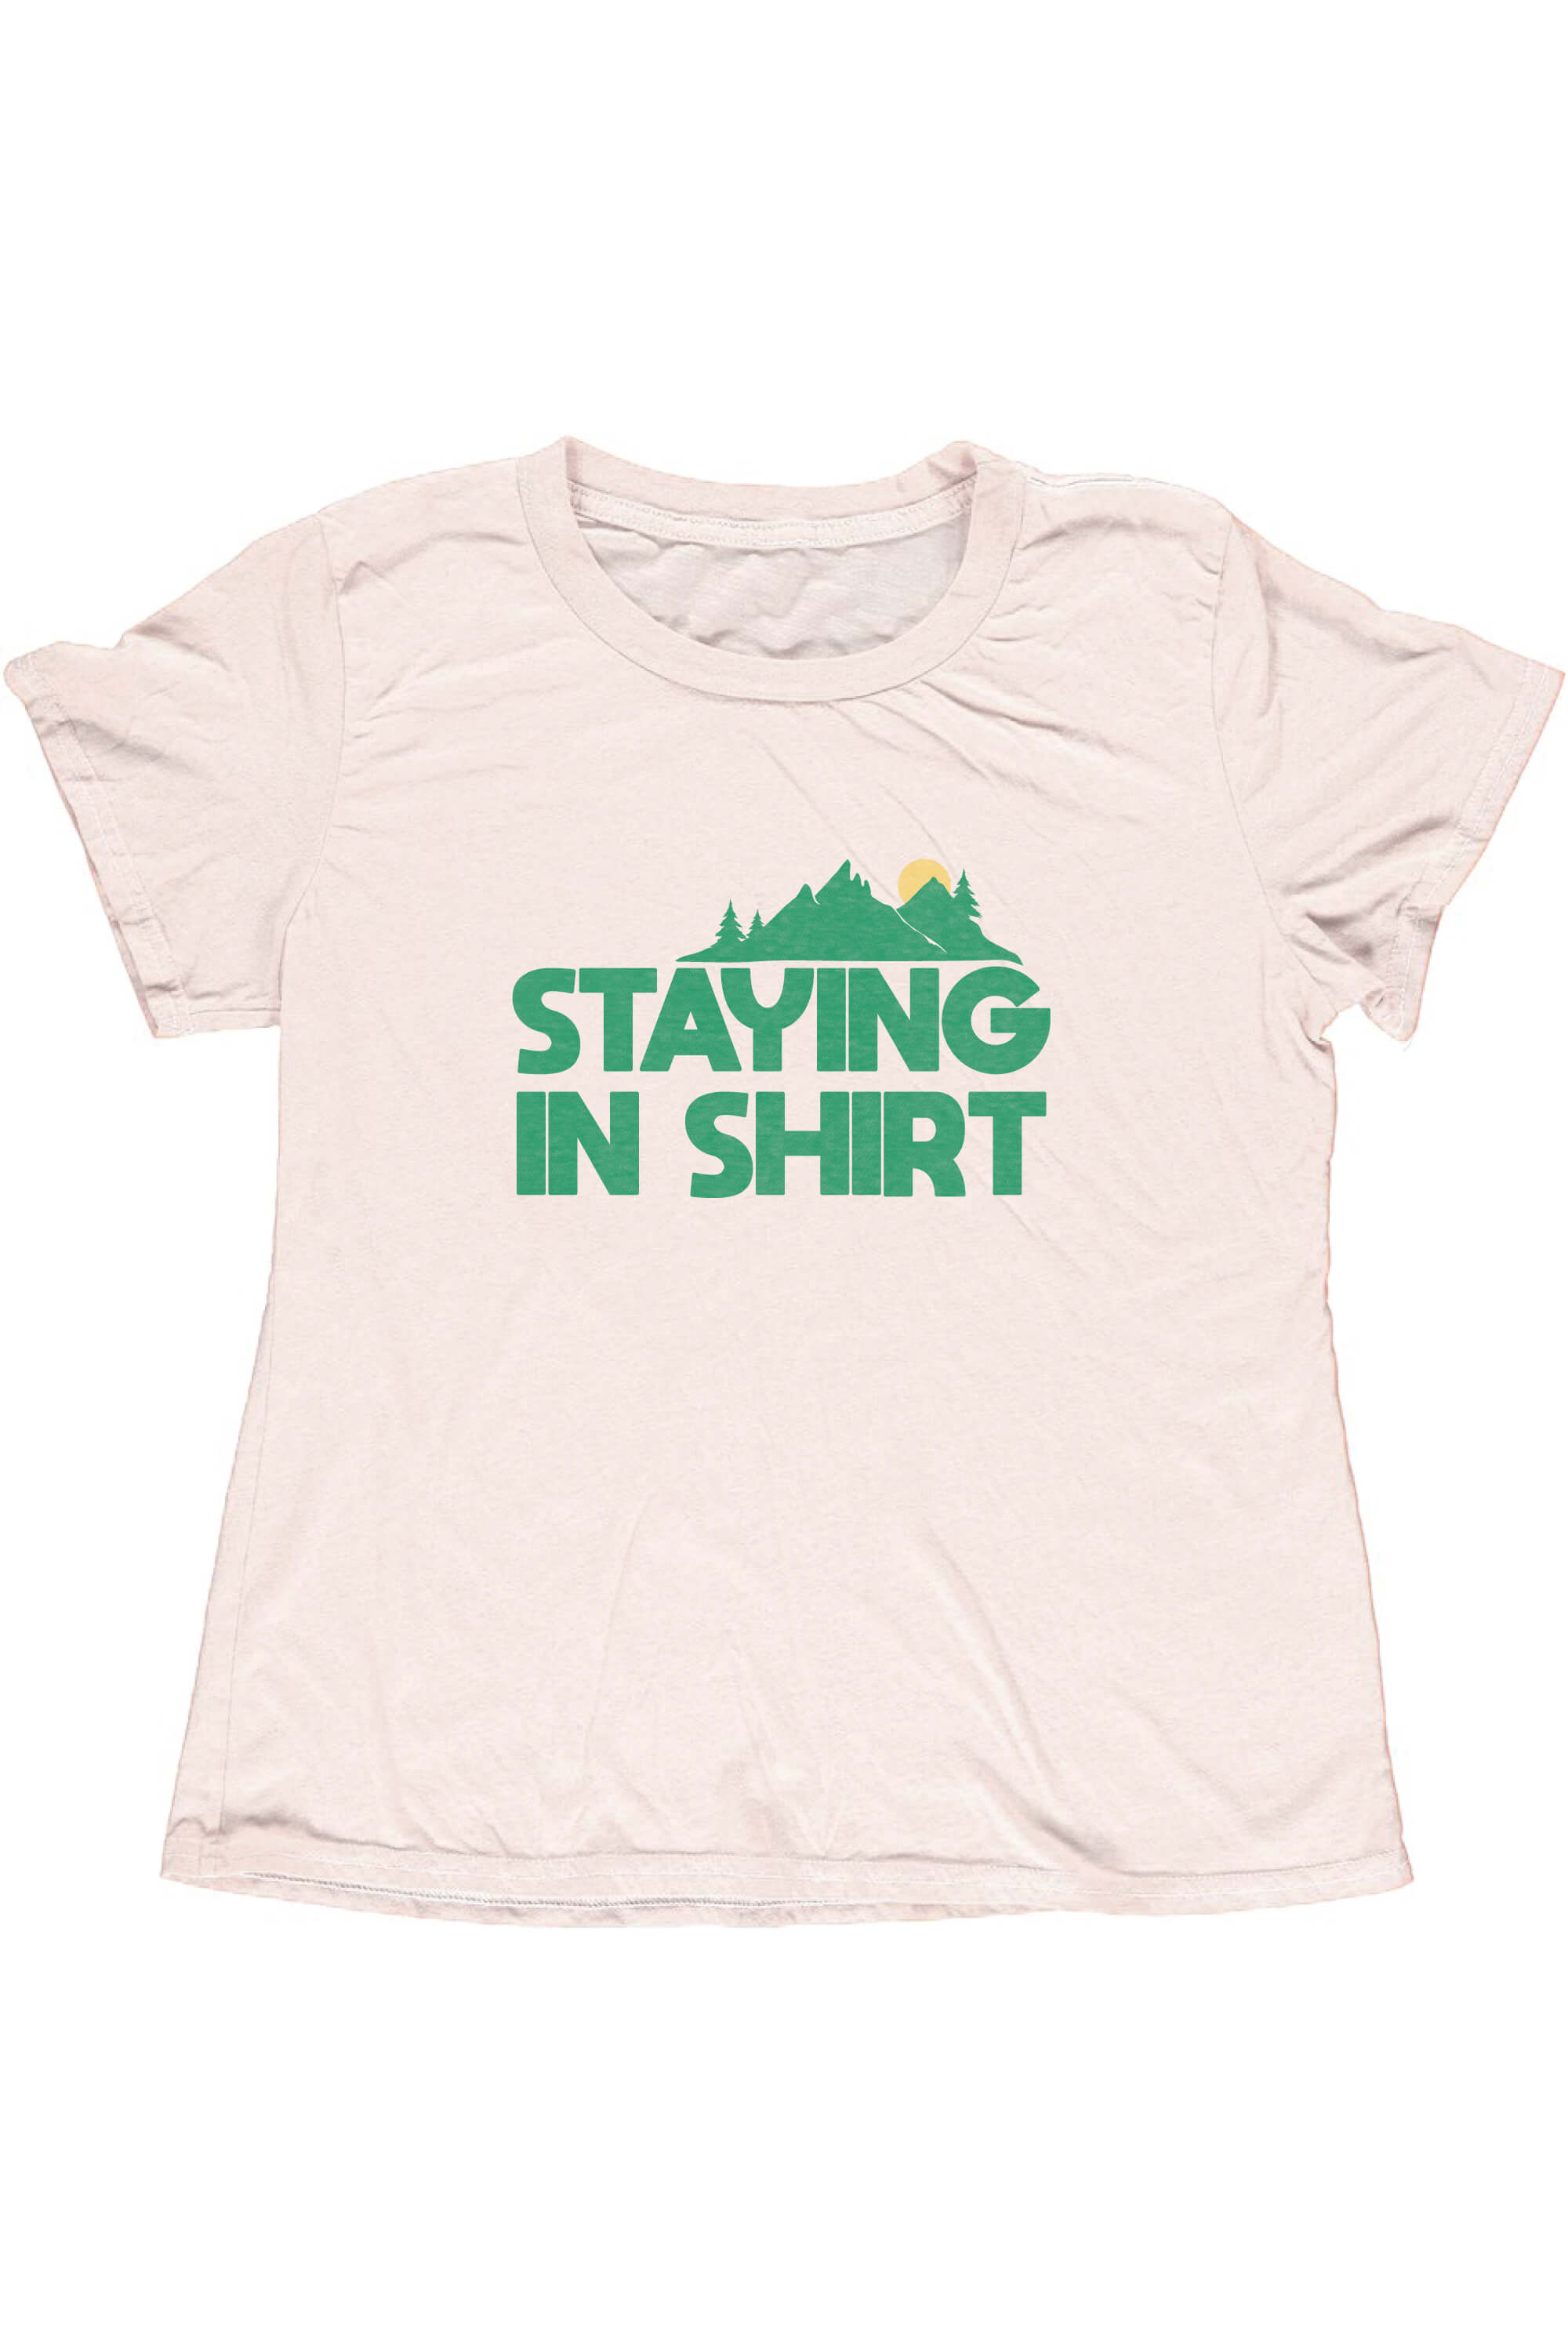 STAYING IN SHIRT YOUTH SIZE LOOSE TEE